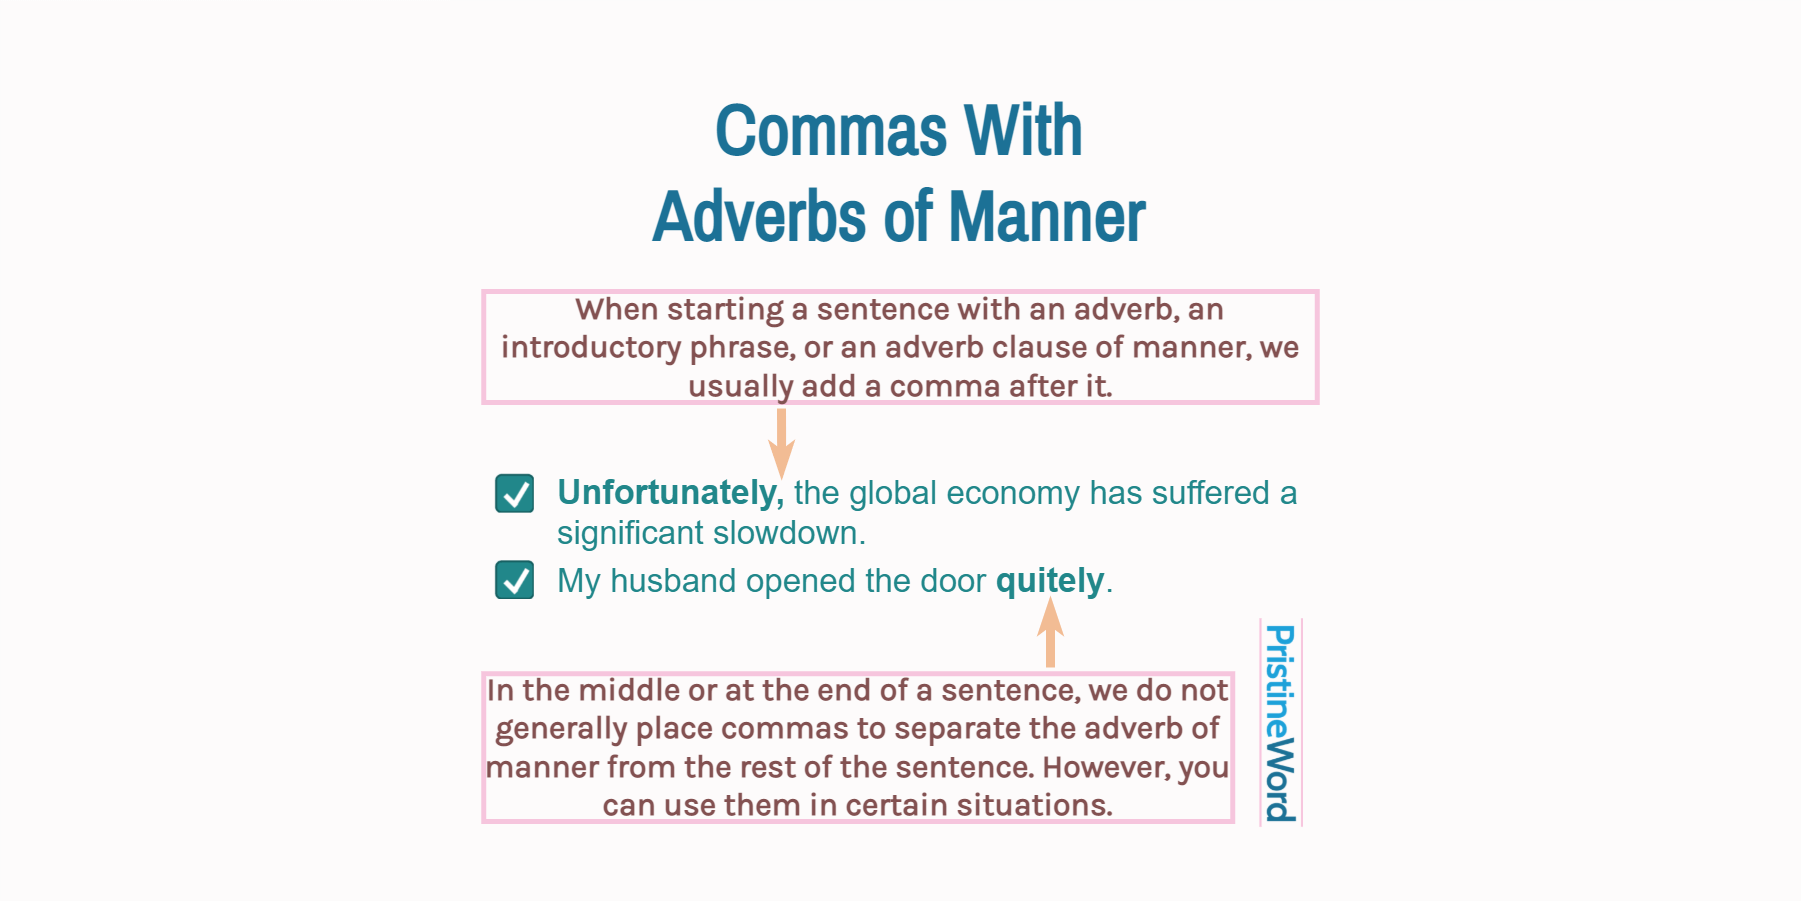 Commas With Adverbs of Manner